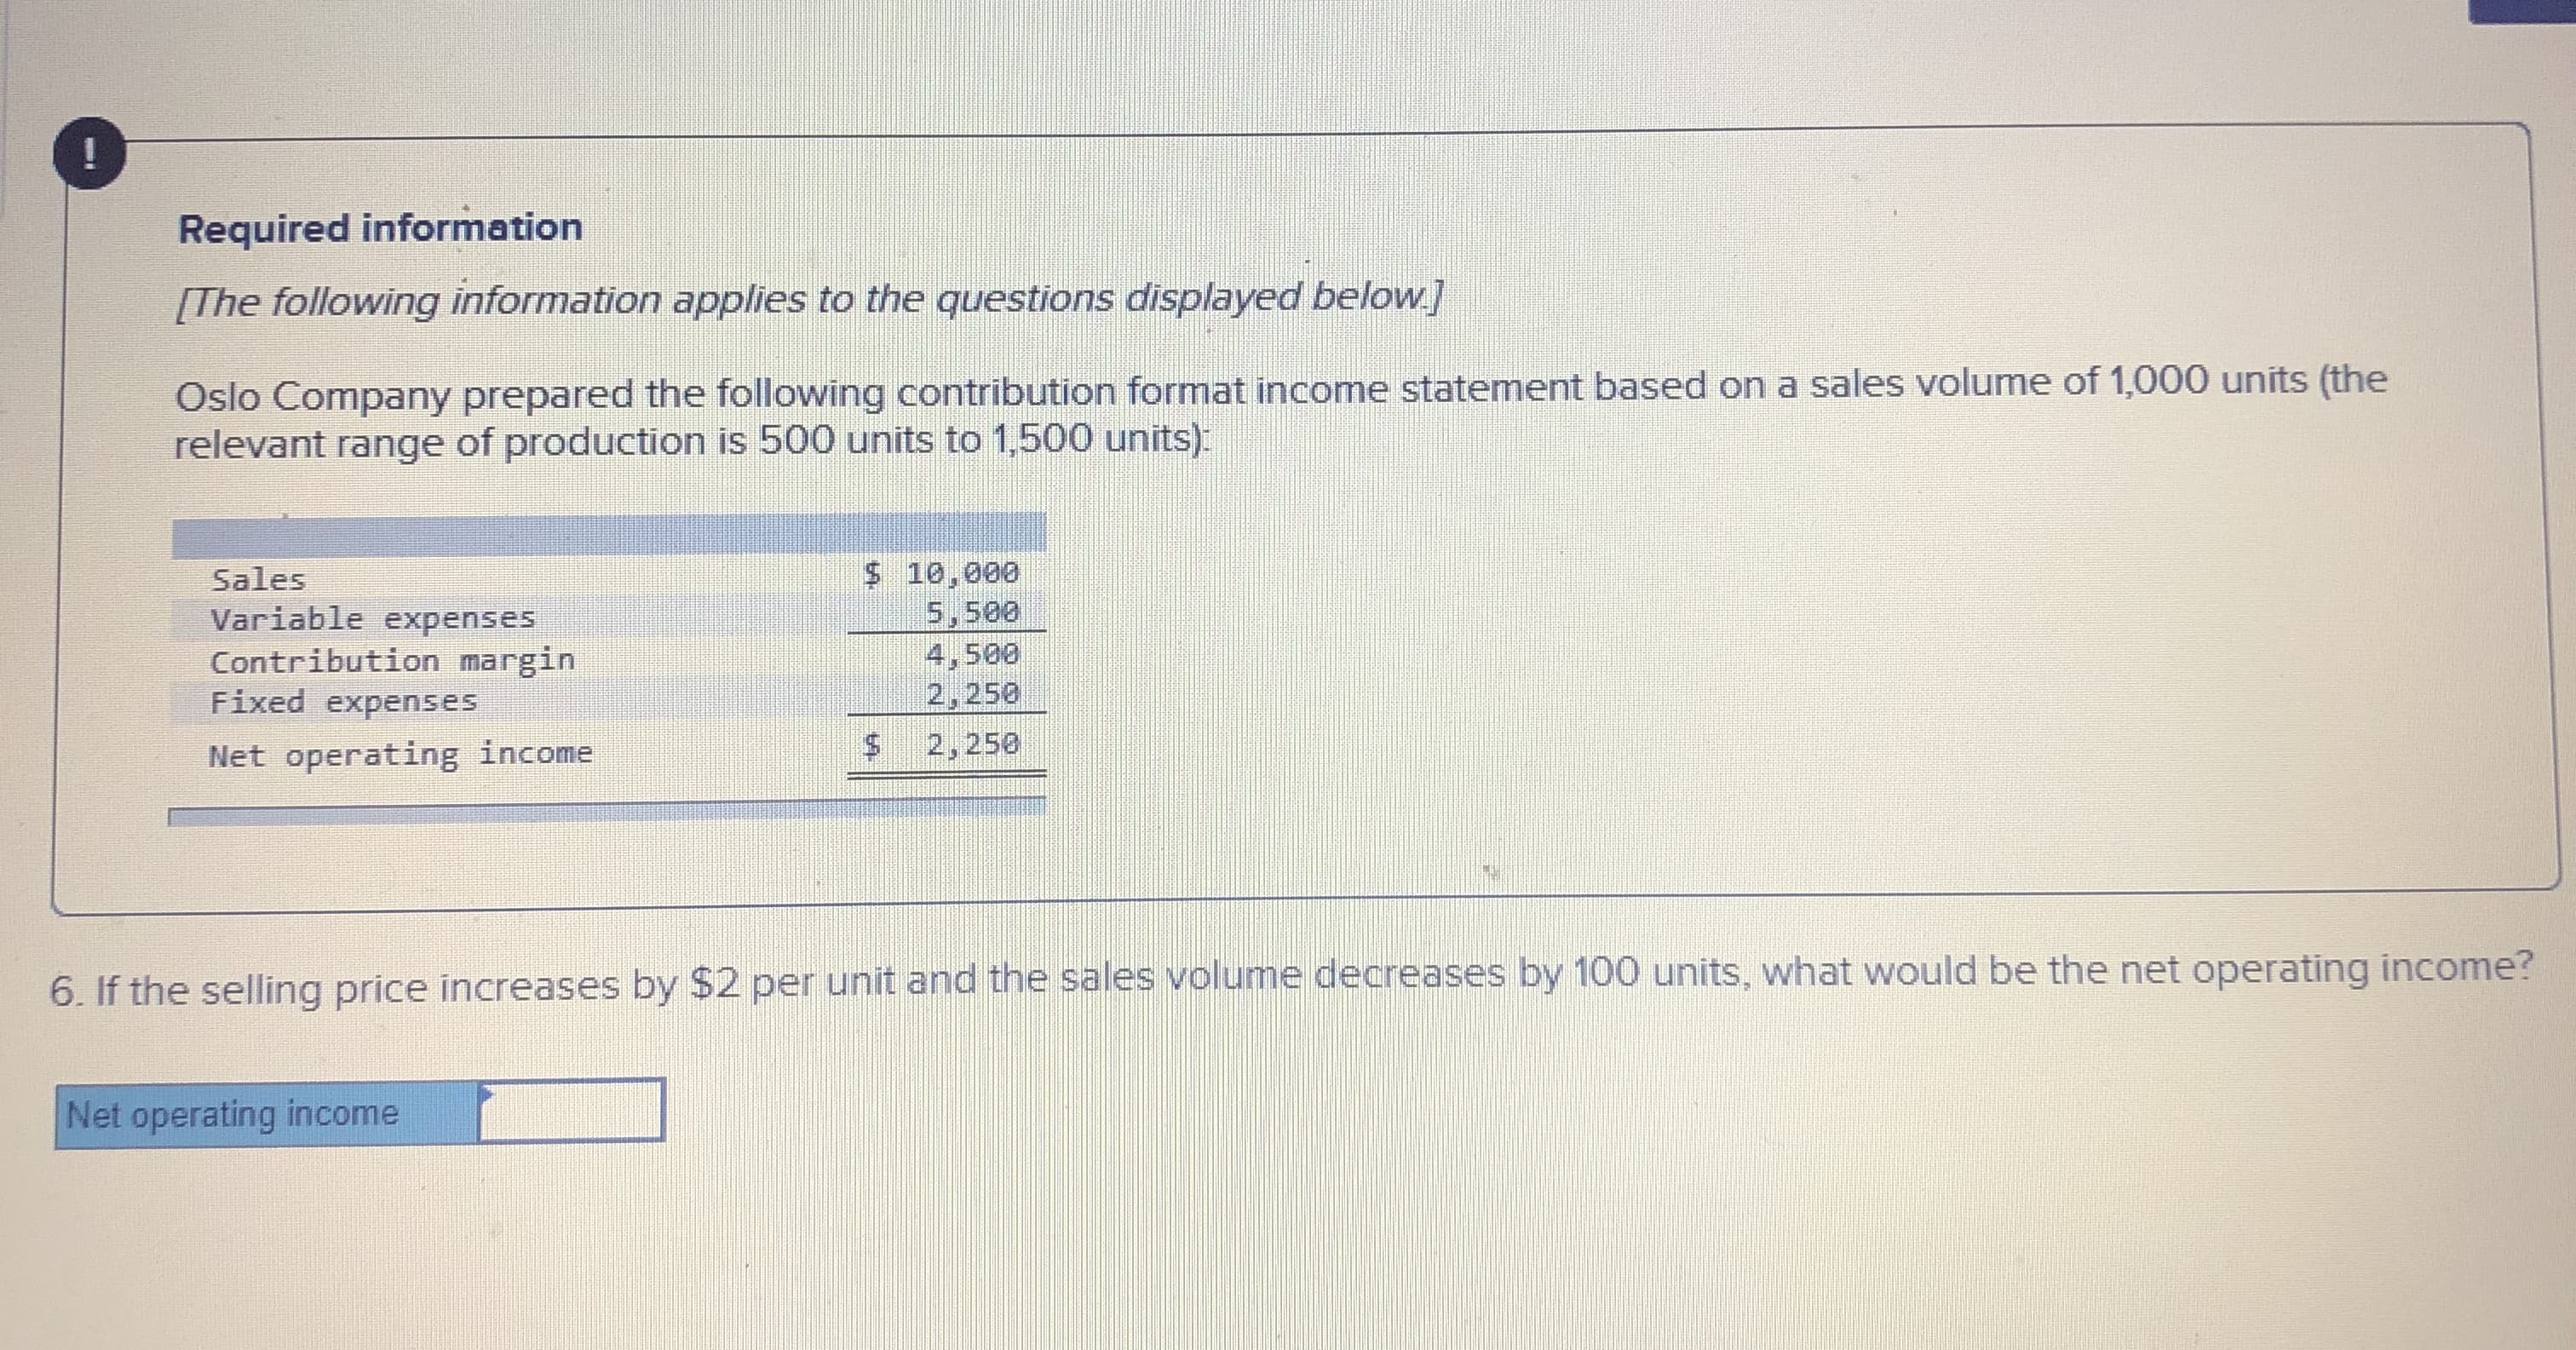 !
Required information
[The following information applies to the questions displayed below]
Oslo Company prepared the following contribution format income statement based on a sales volume of 1,000 units (the
relevant range of production is 500 units to 1,500 units)
$ 10,000
5,500
4,500
2,250
Sales
Variable expenses
Contribution margin
Fixed expenses
Net operating income
2,250
6. If the selling price increases by $2 per unit and the sales volume decreases by 100 units, what would be the net operating income?
Net operating income
%24
